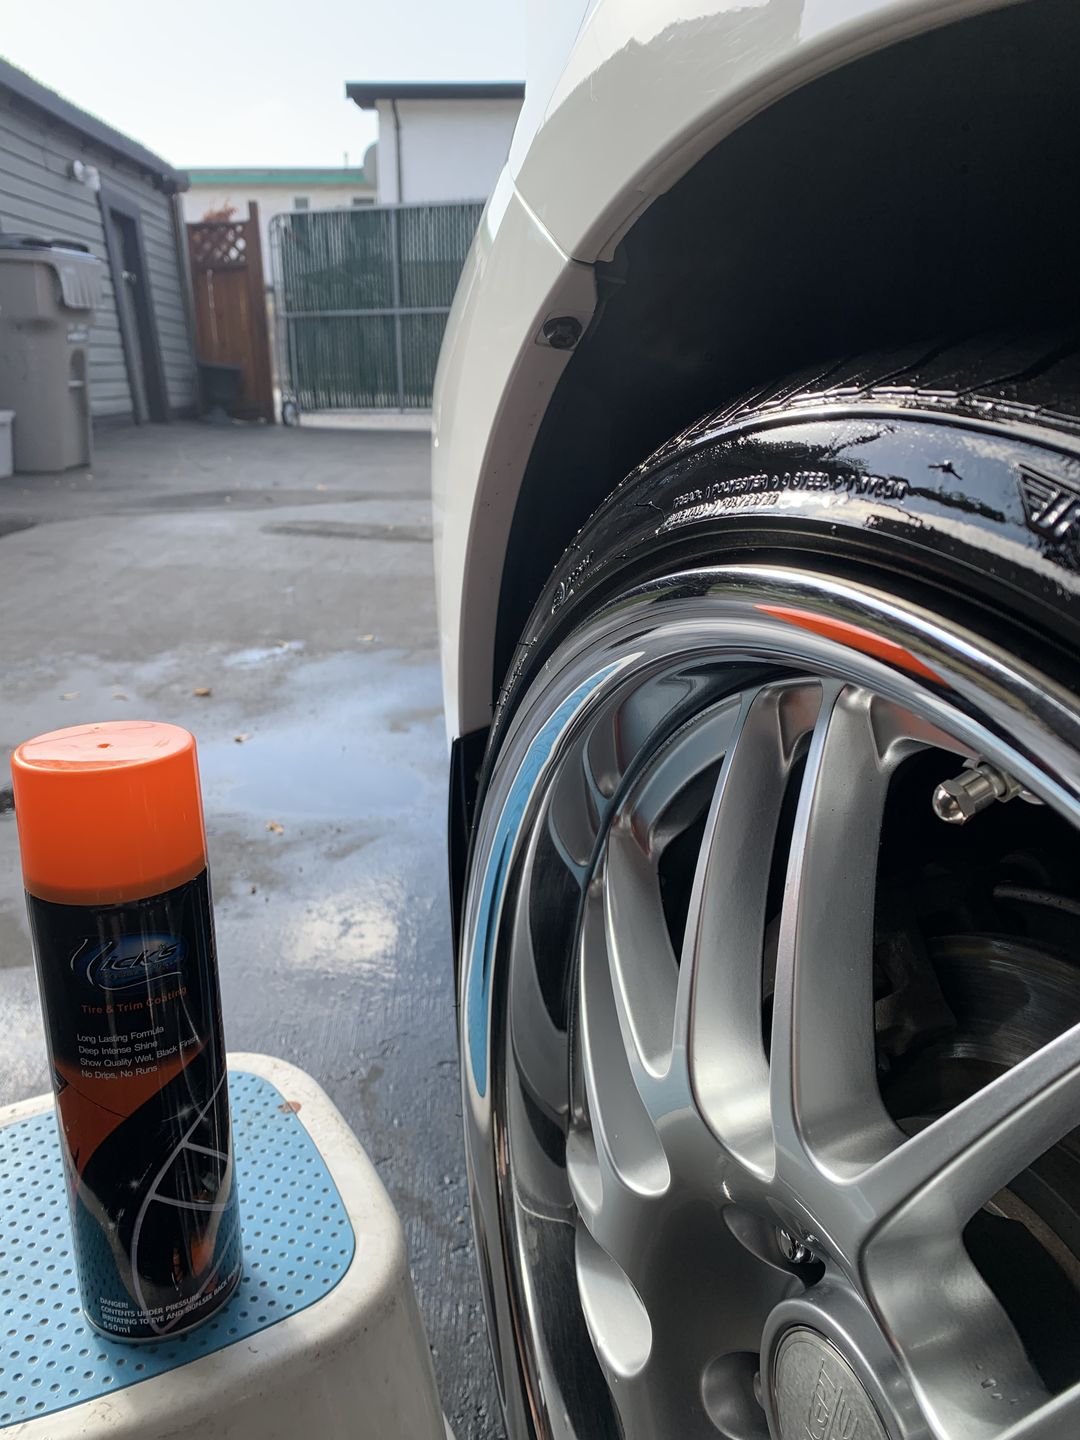 Nick's Professional Supplies🔵 on Instagram: You know it's something  special when our customers can't help but gush about their pristine tires.  Our tire shine is a rich, high-gloss formula that enhances the